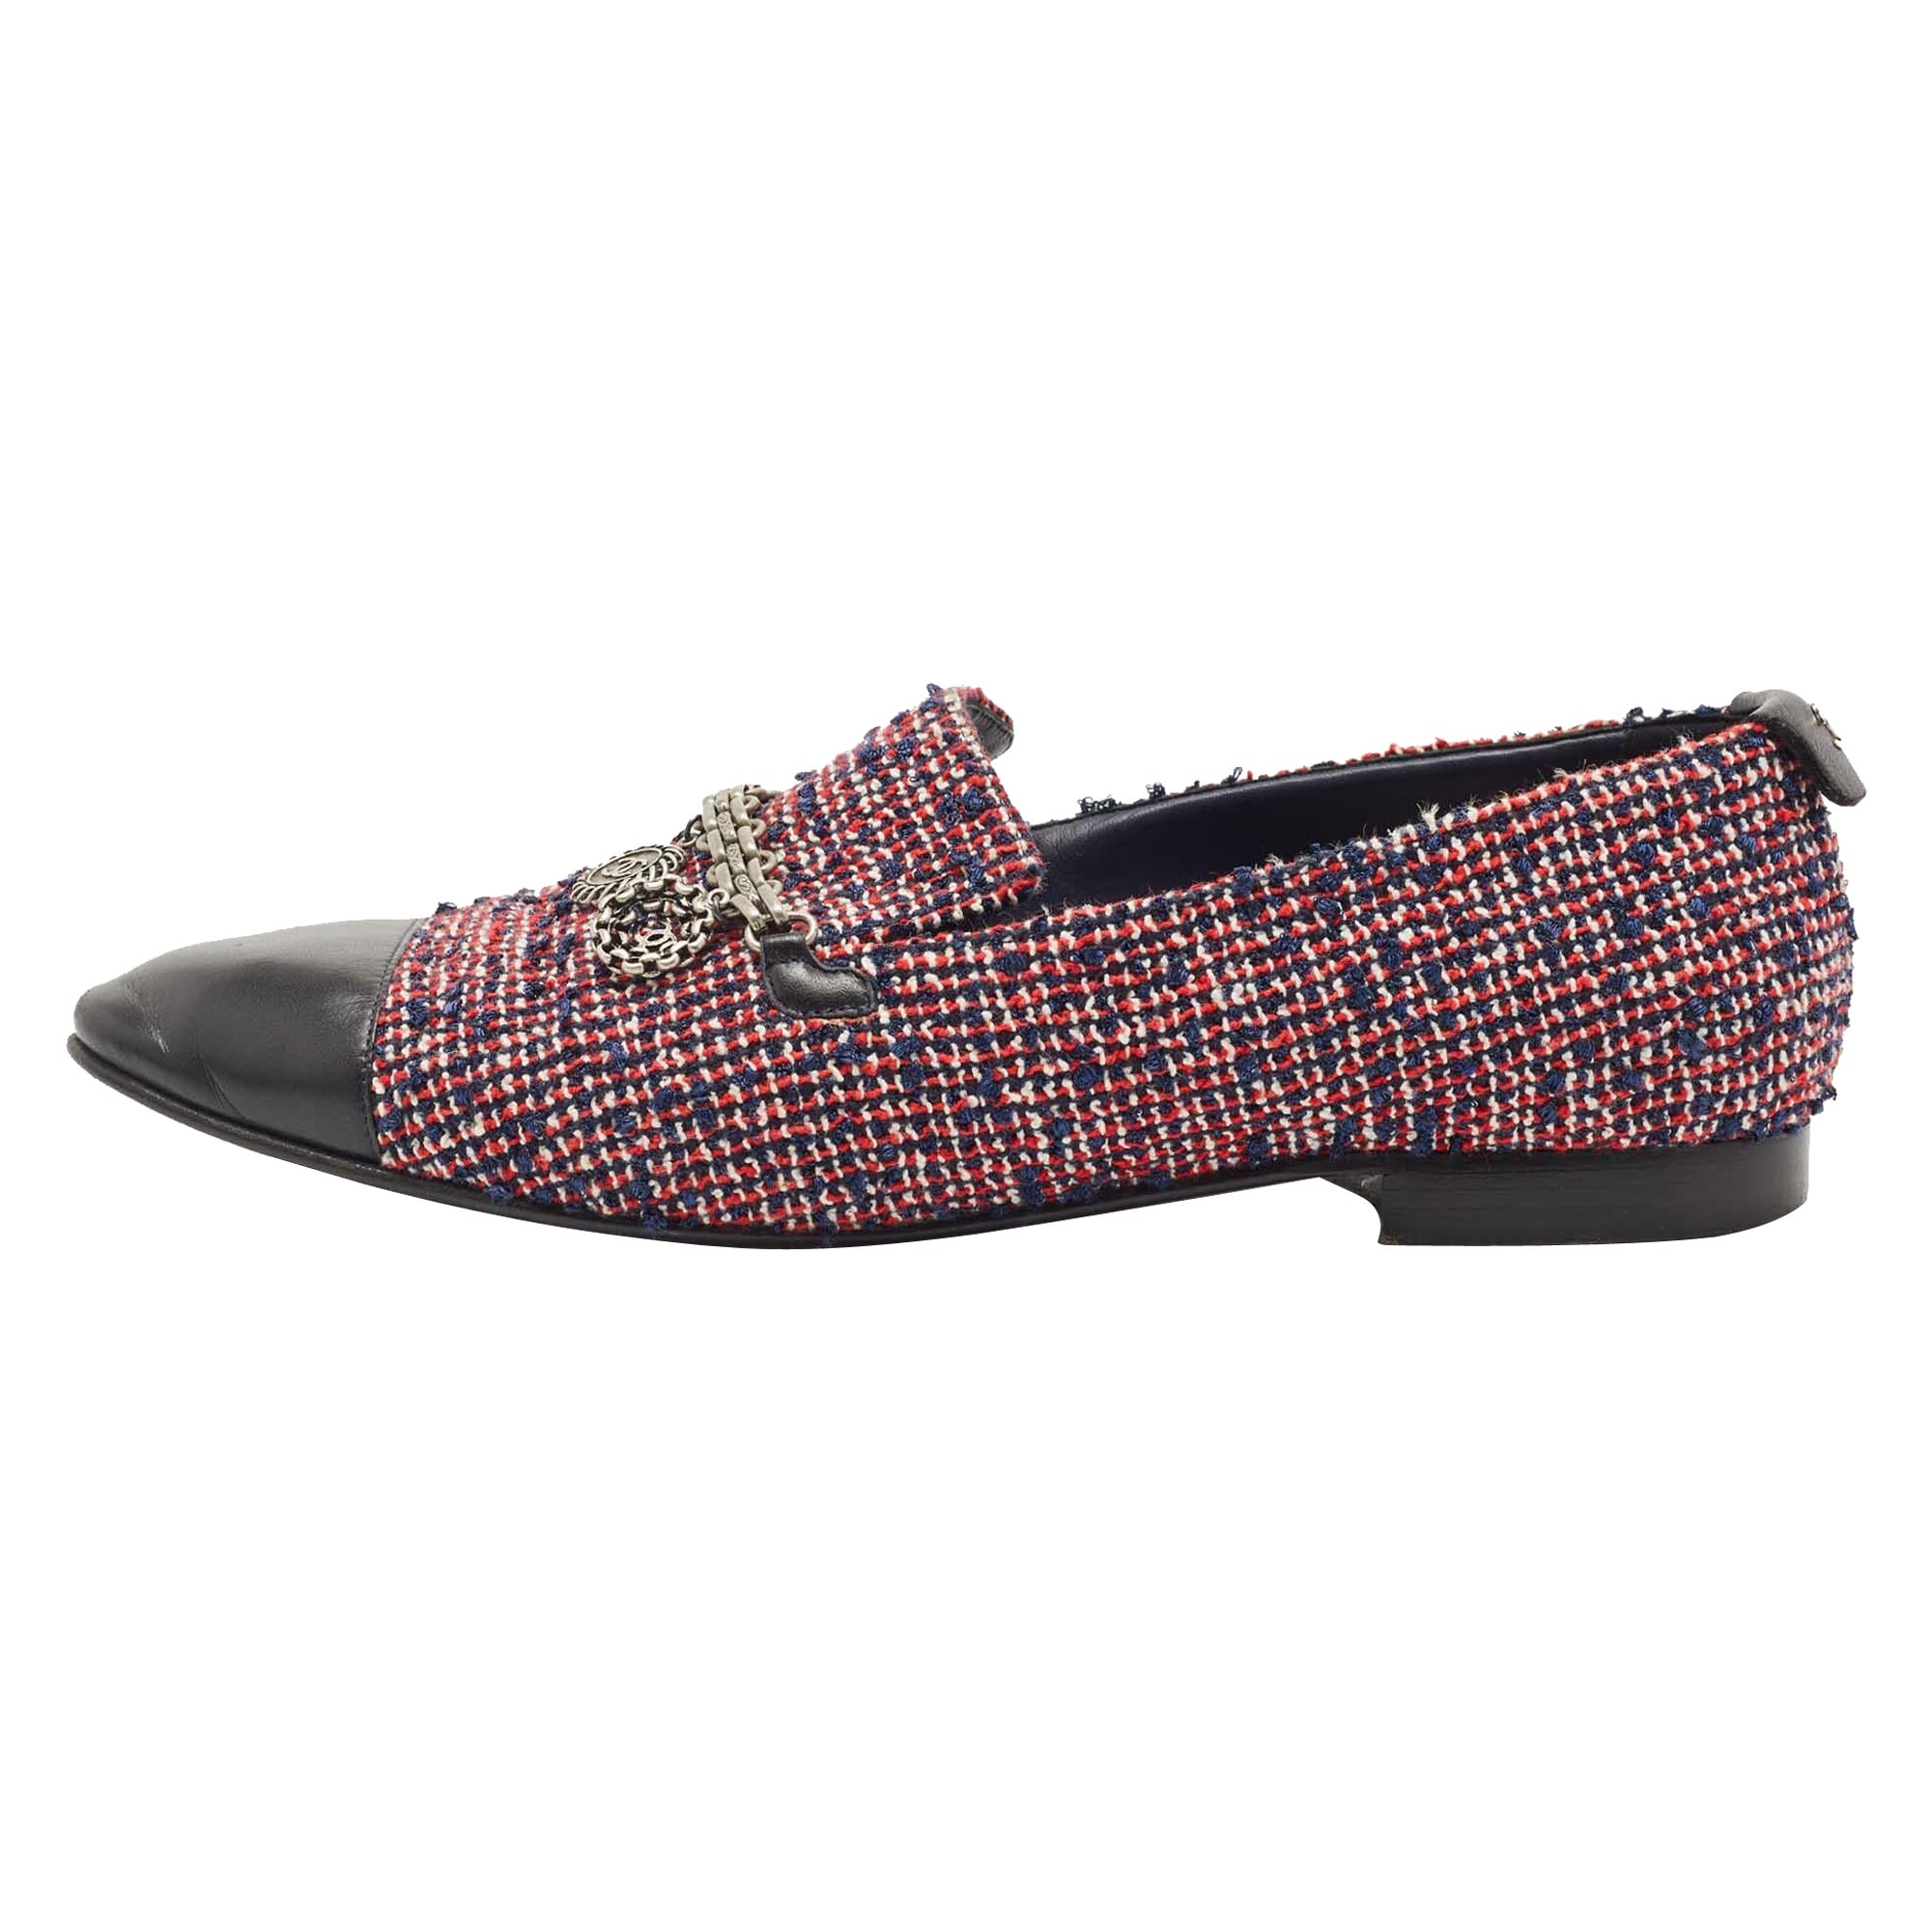 CHANEL, Shoes, Chanel Tweed Moccasins With Charm Embellishments